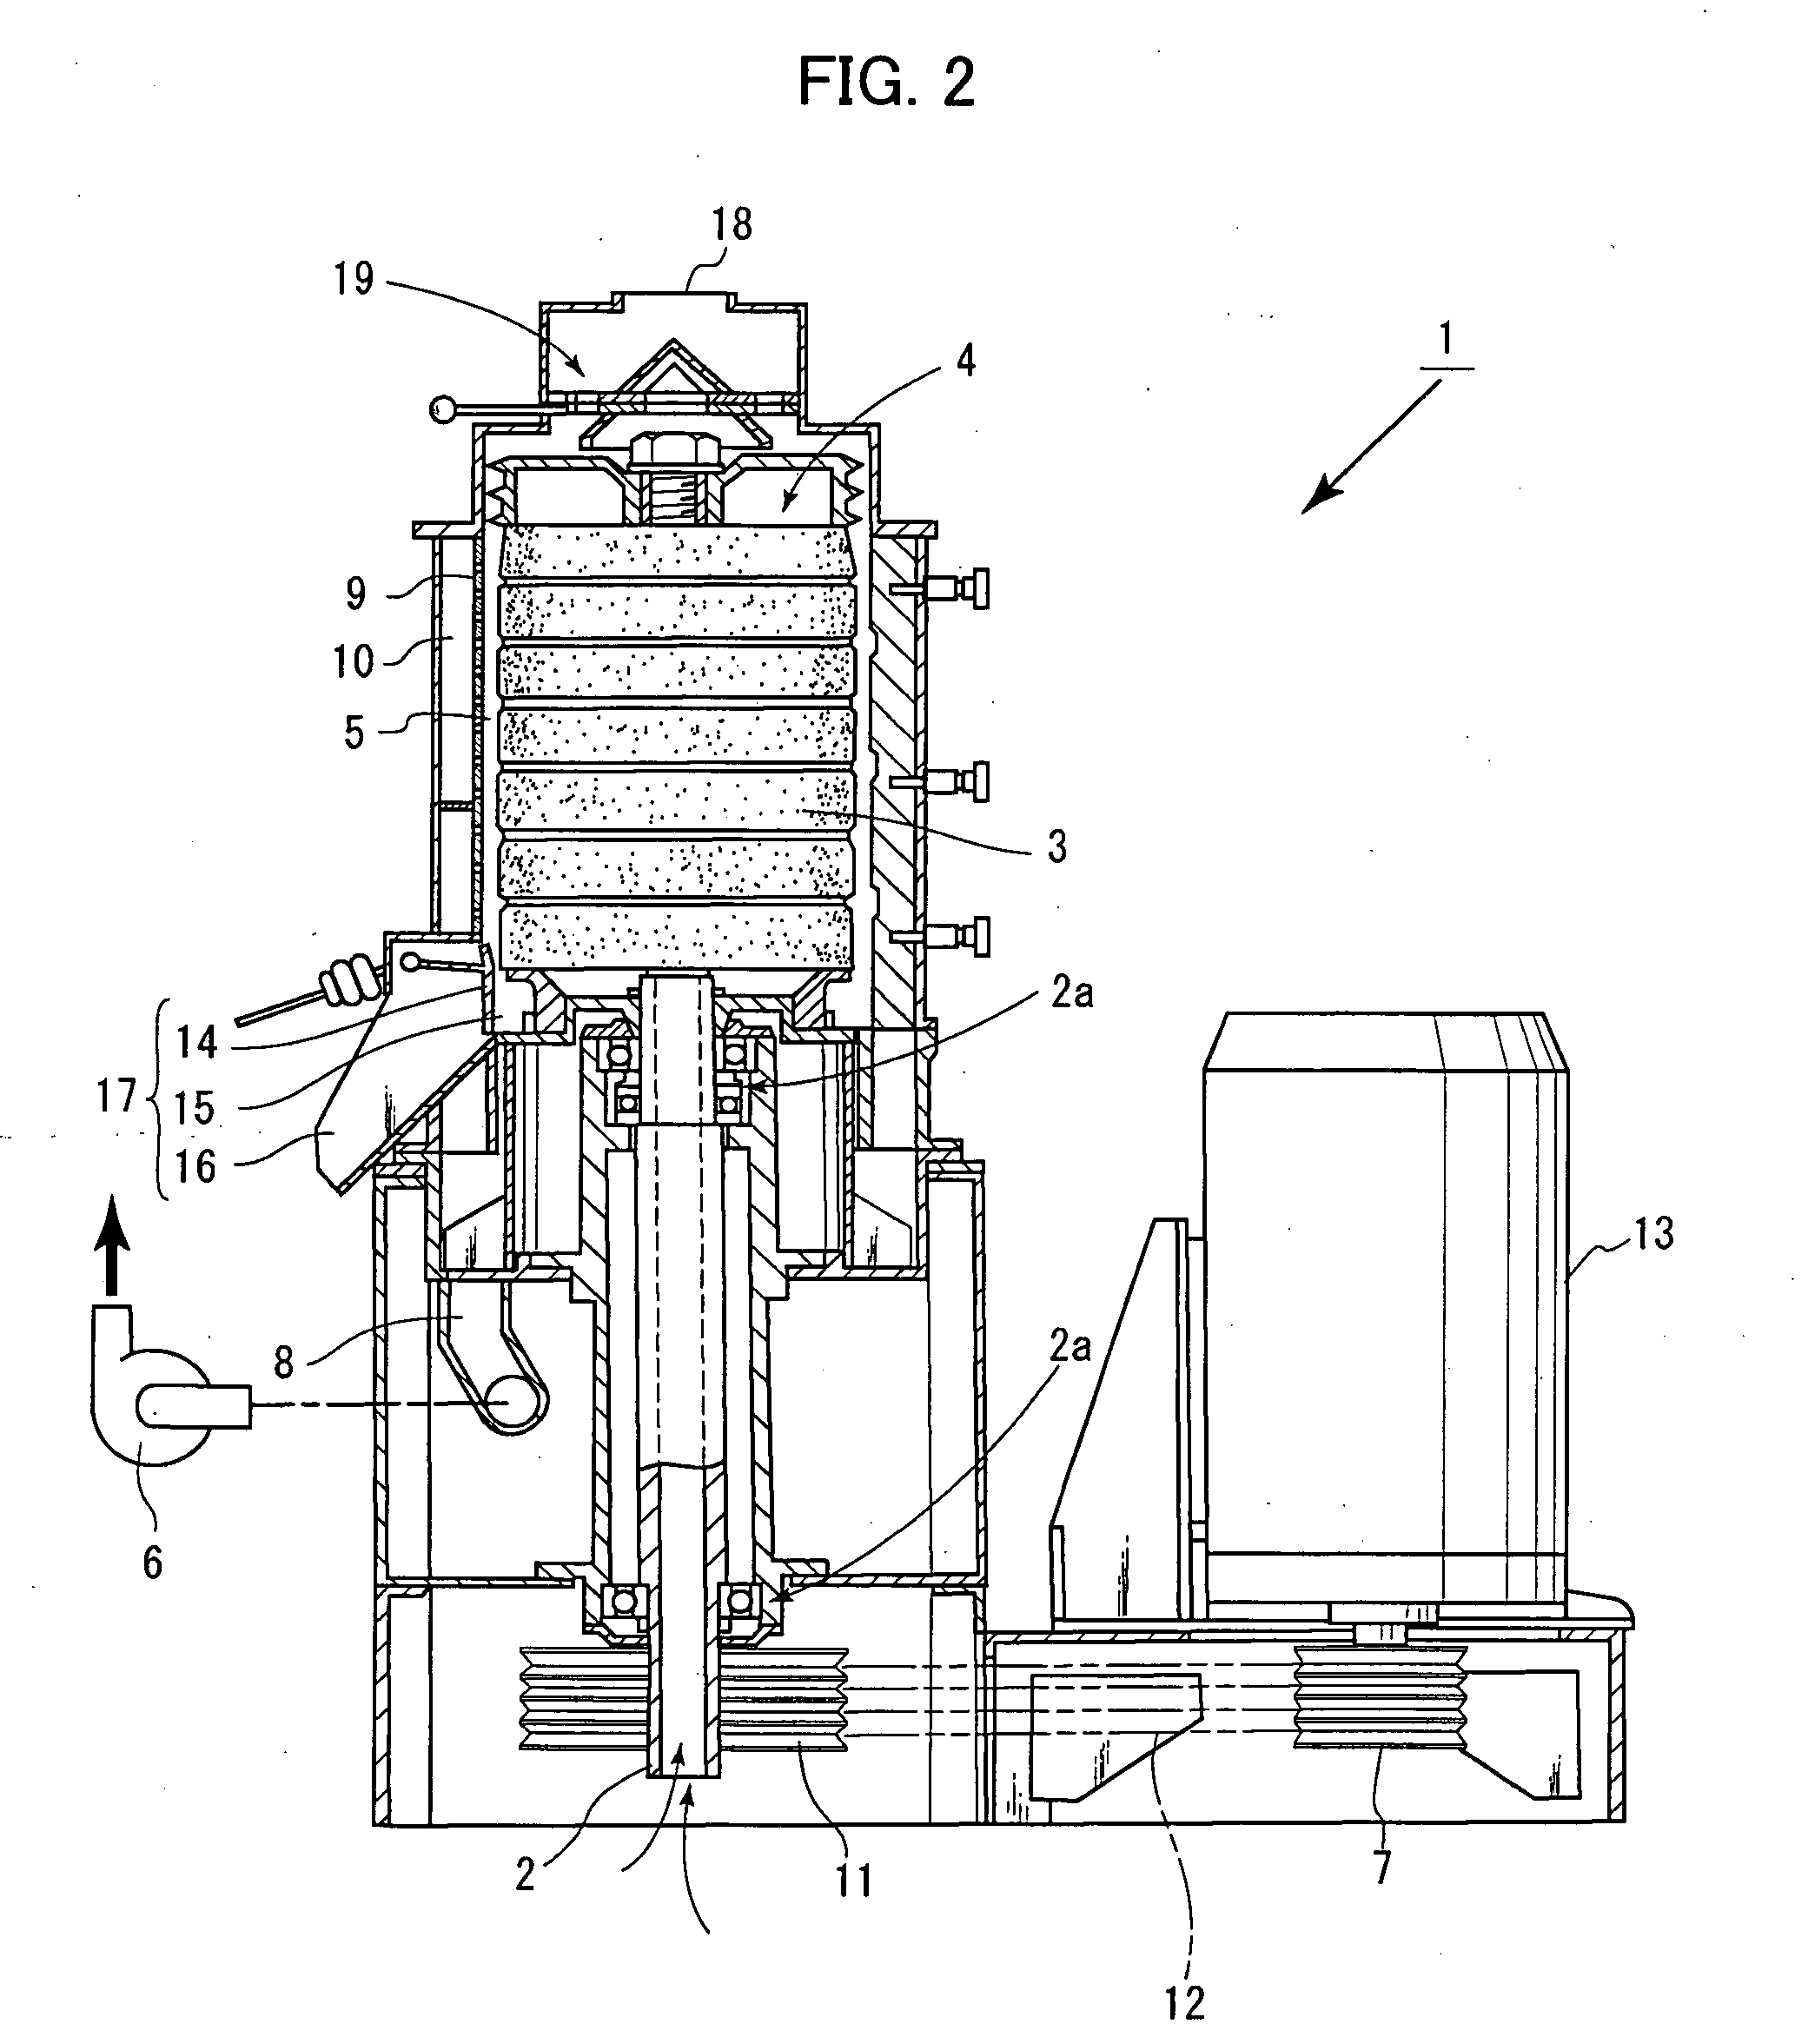 Method of producing parboiled rice and parboiled rice produced by the method